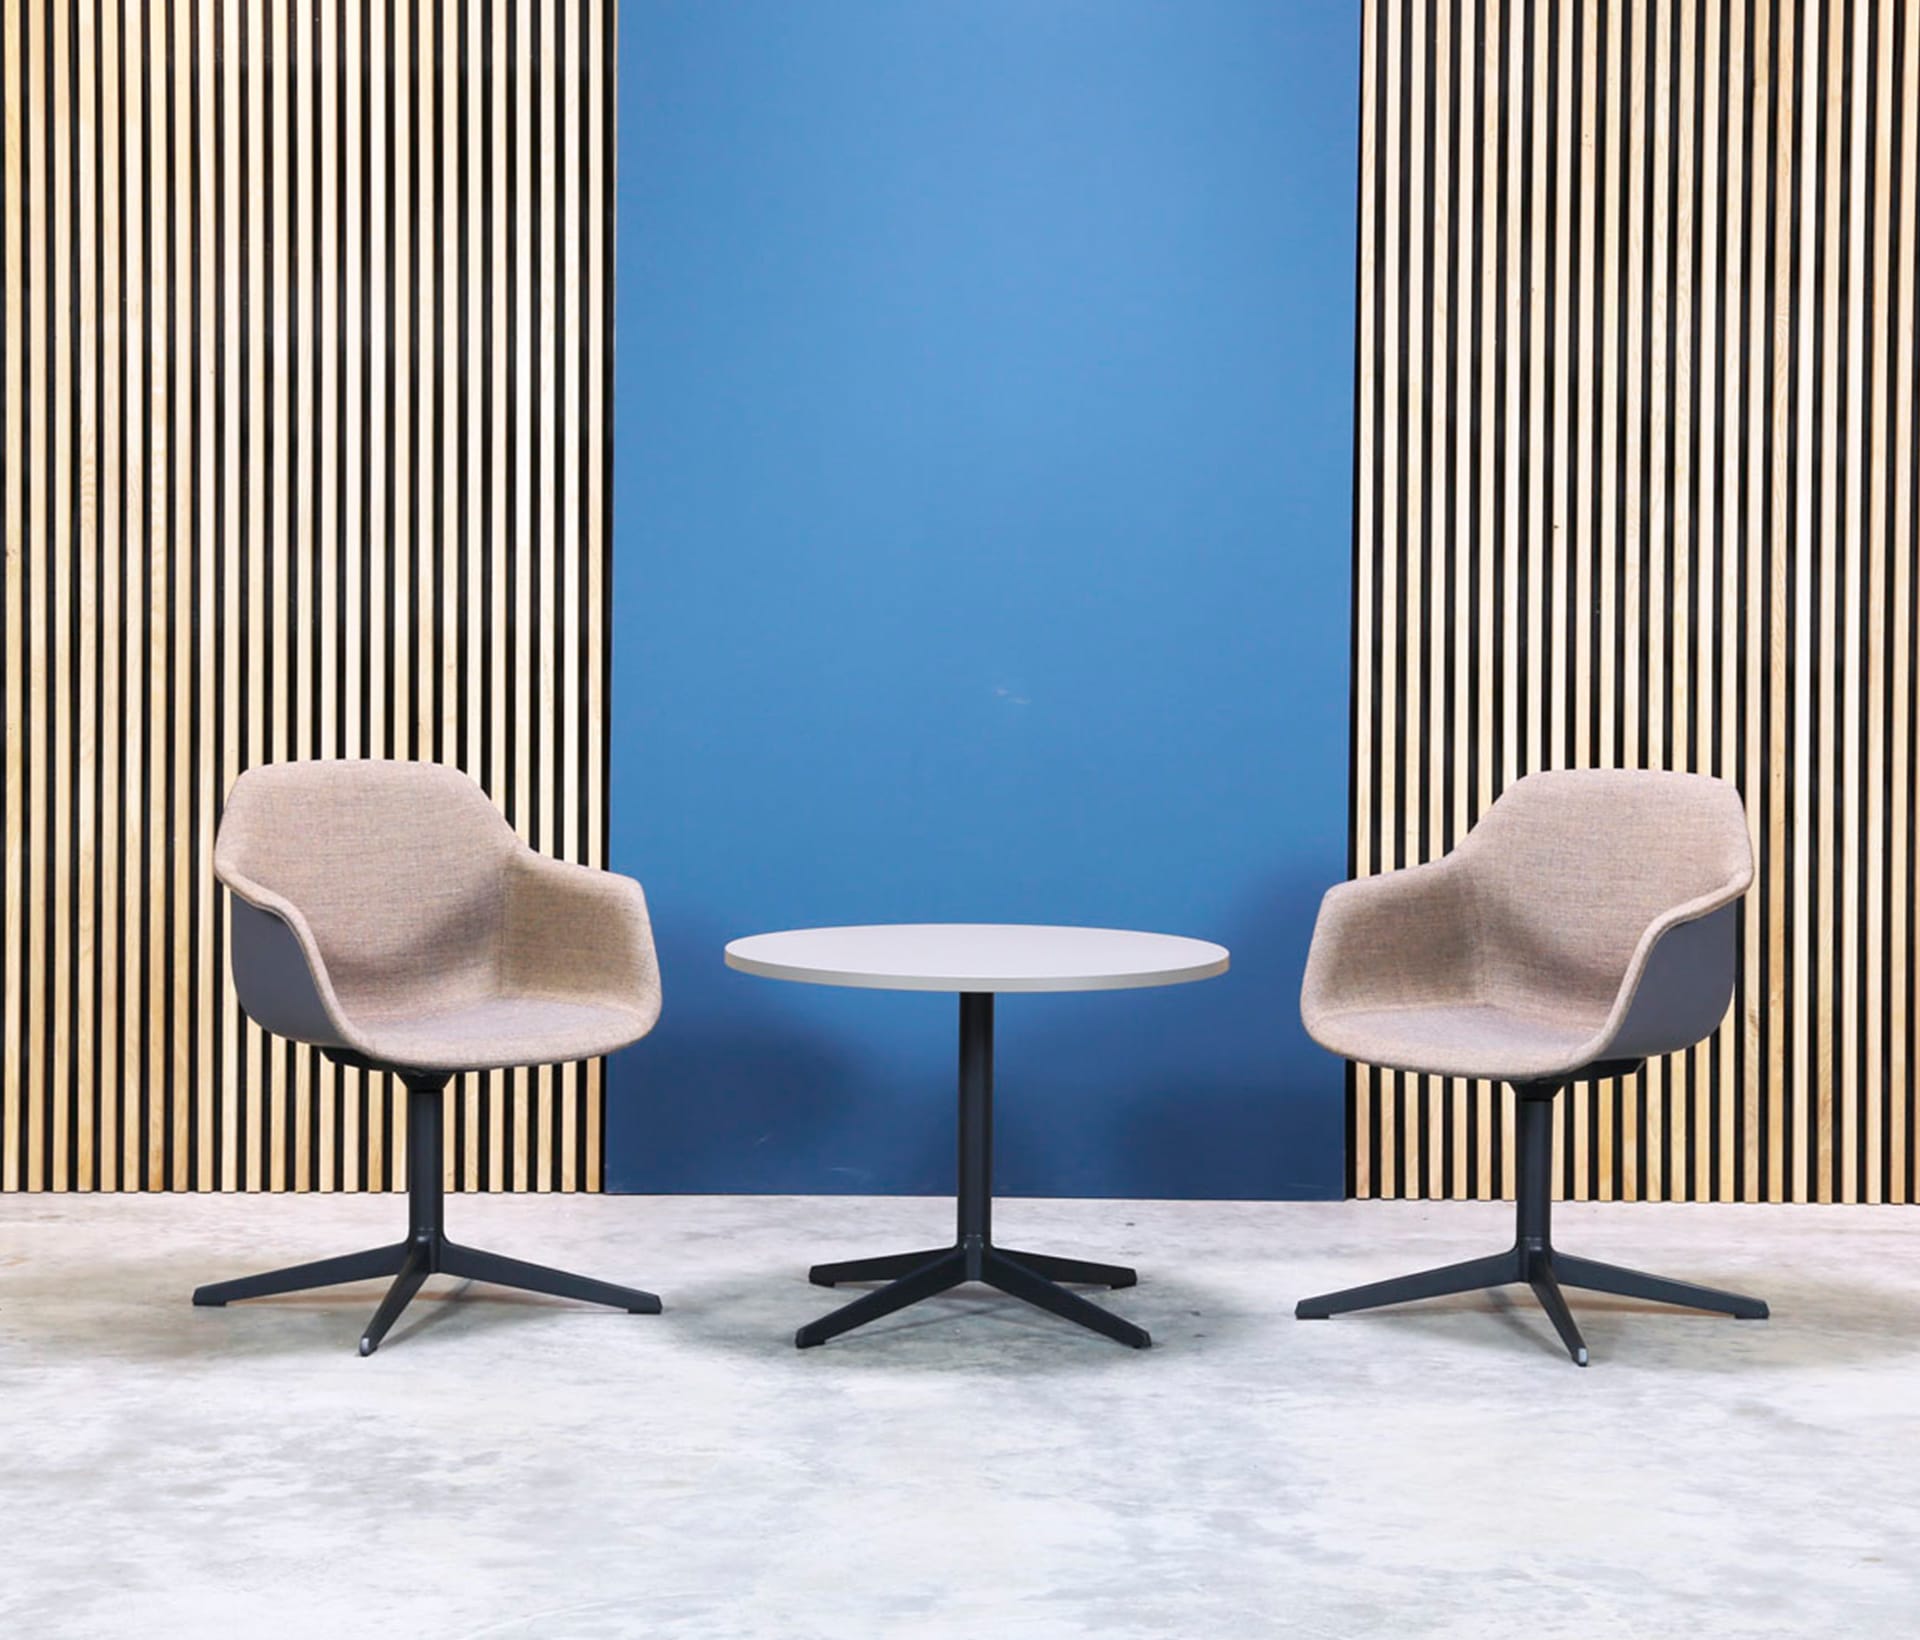 Two chairs and a table in front of a blue wall.